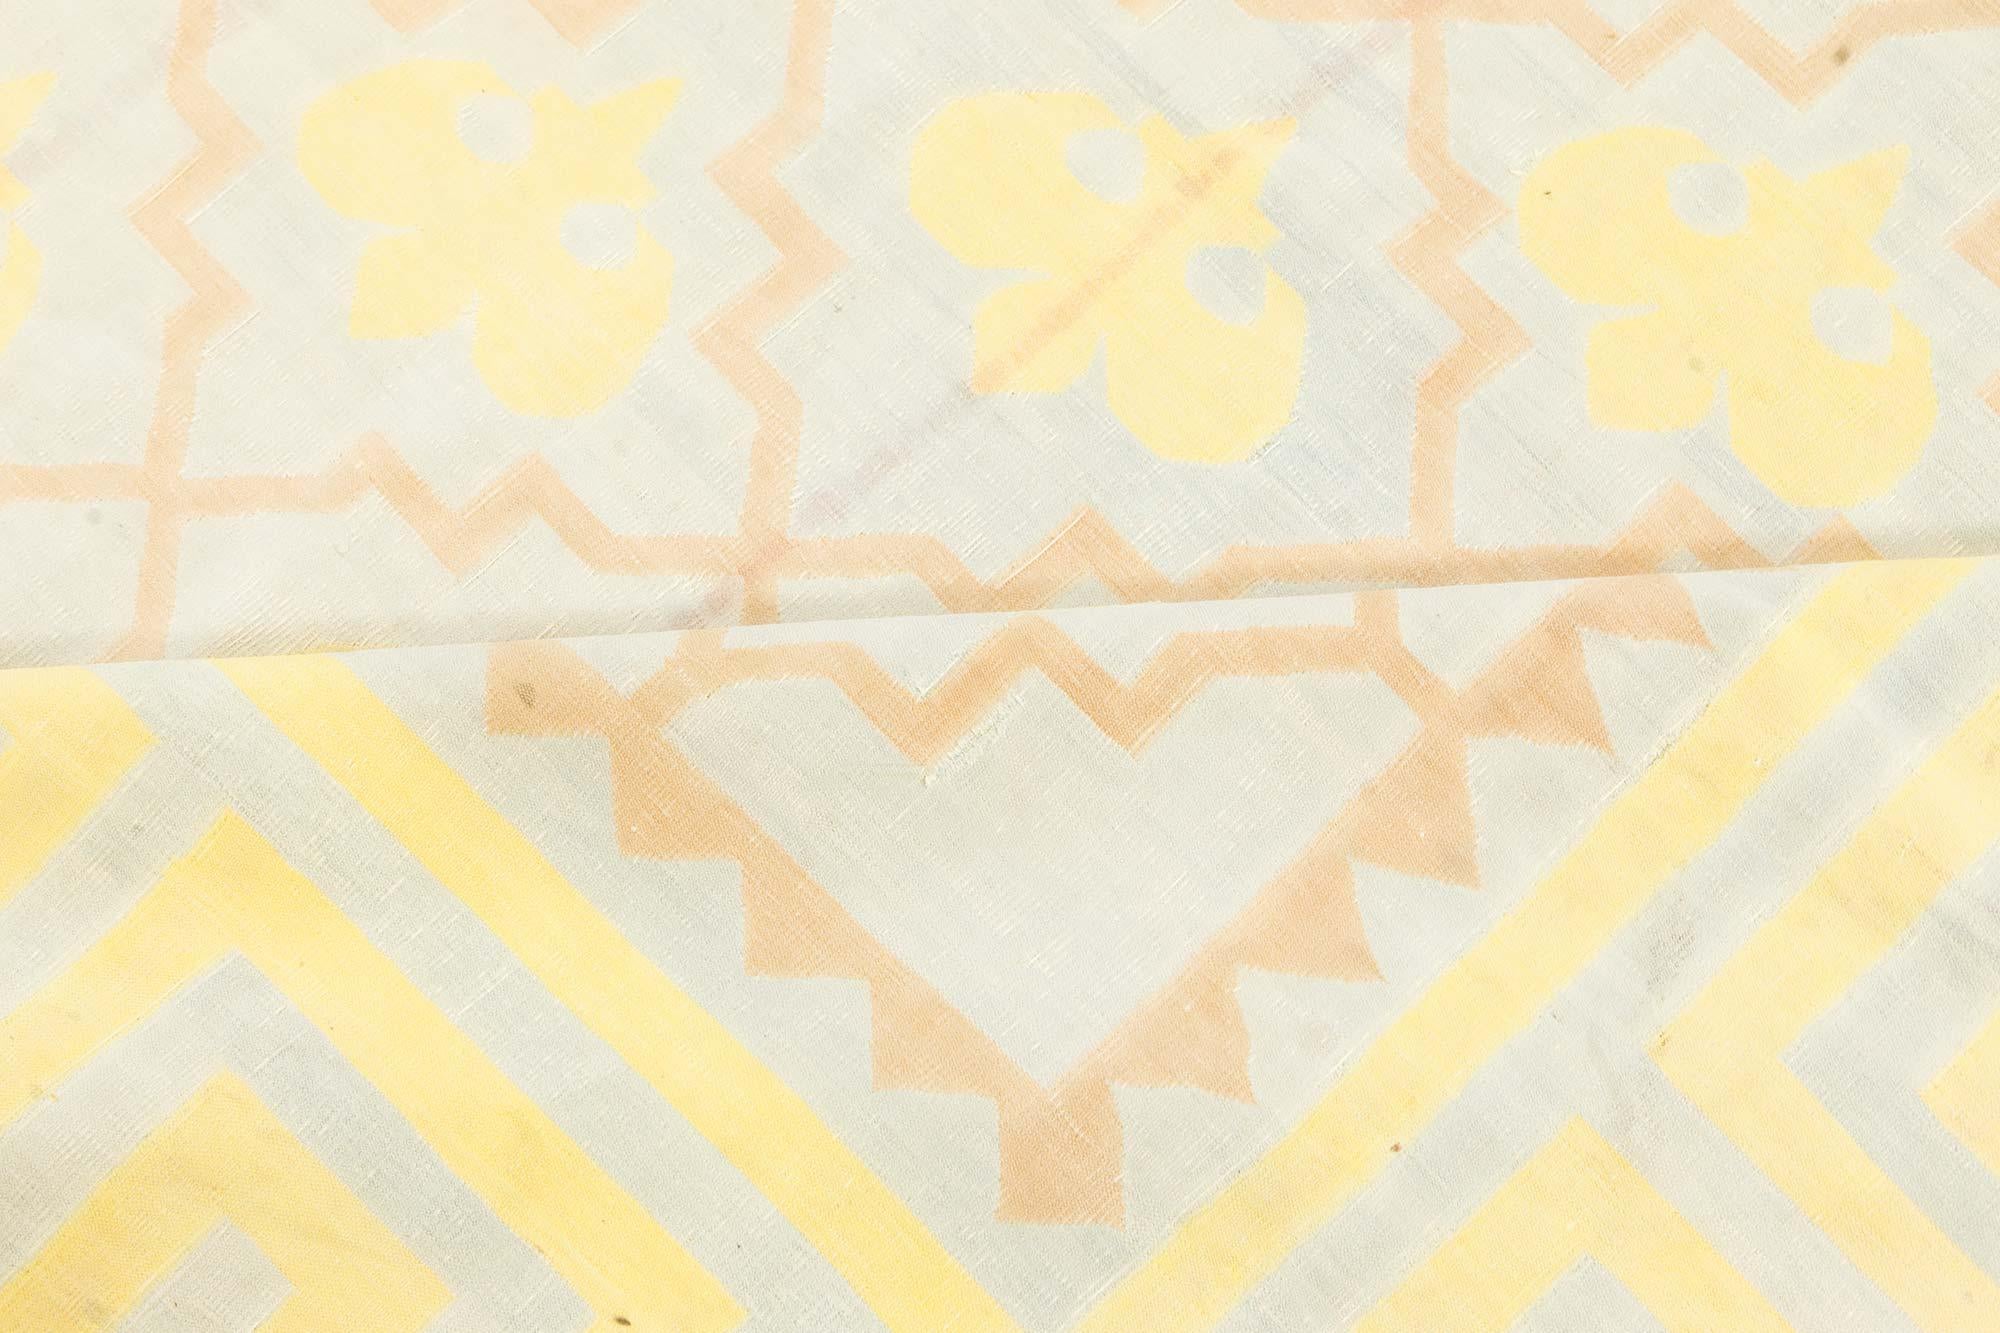 One-of-a-kind extra large golden yellow Indian Dhurrie rug
Size: 18'2